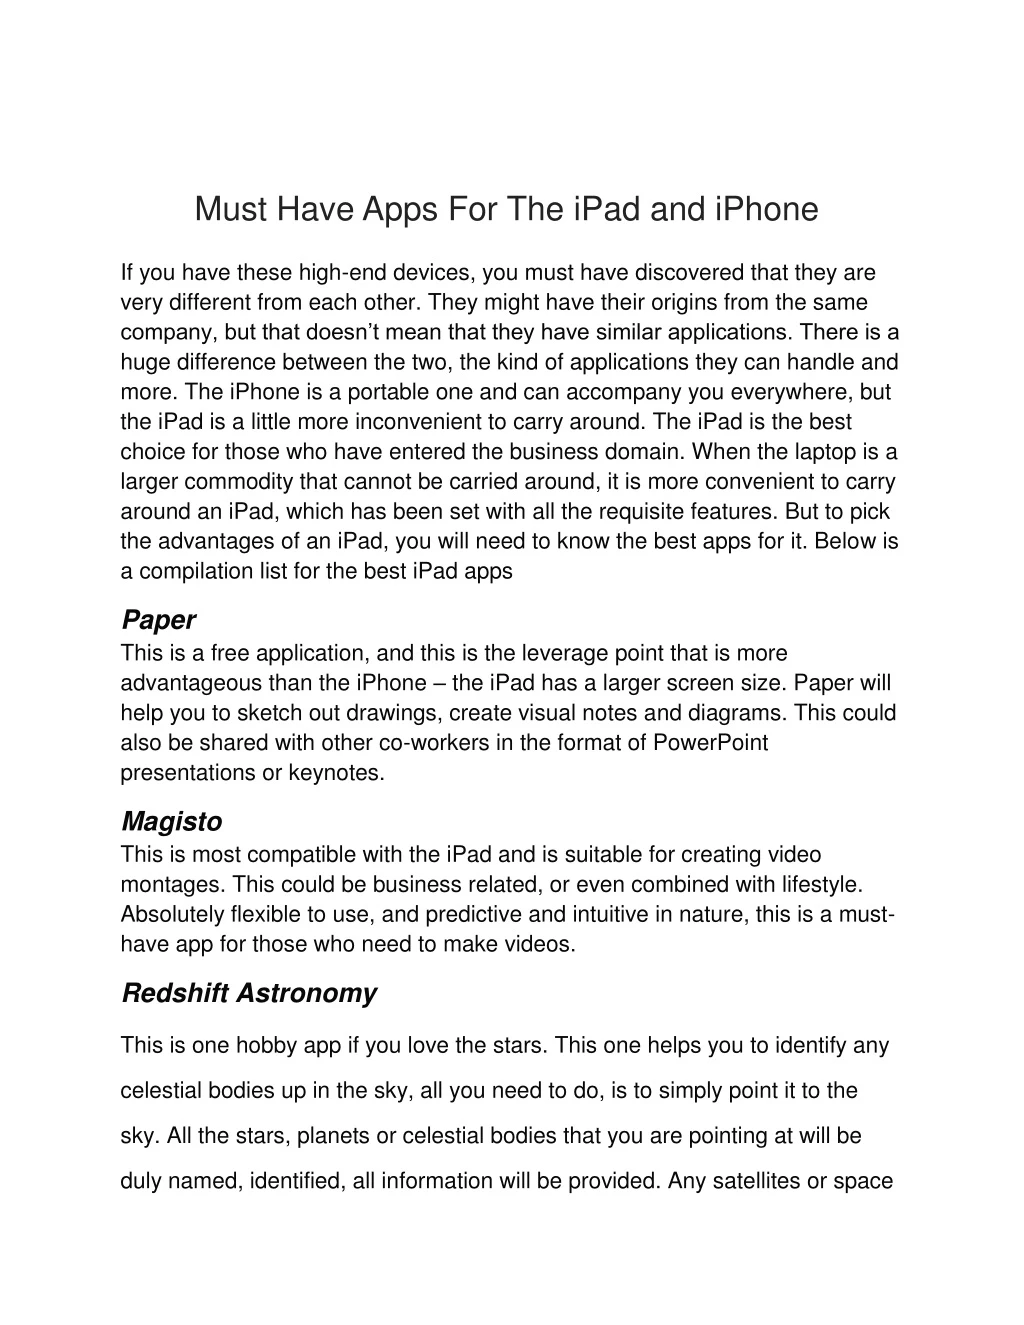 must have apps for the ipad and iphone